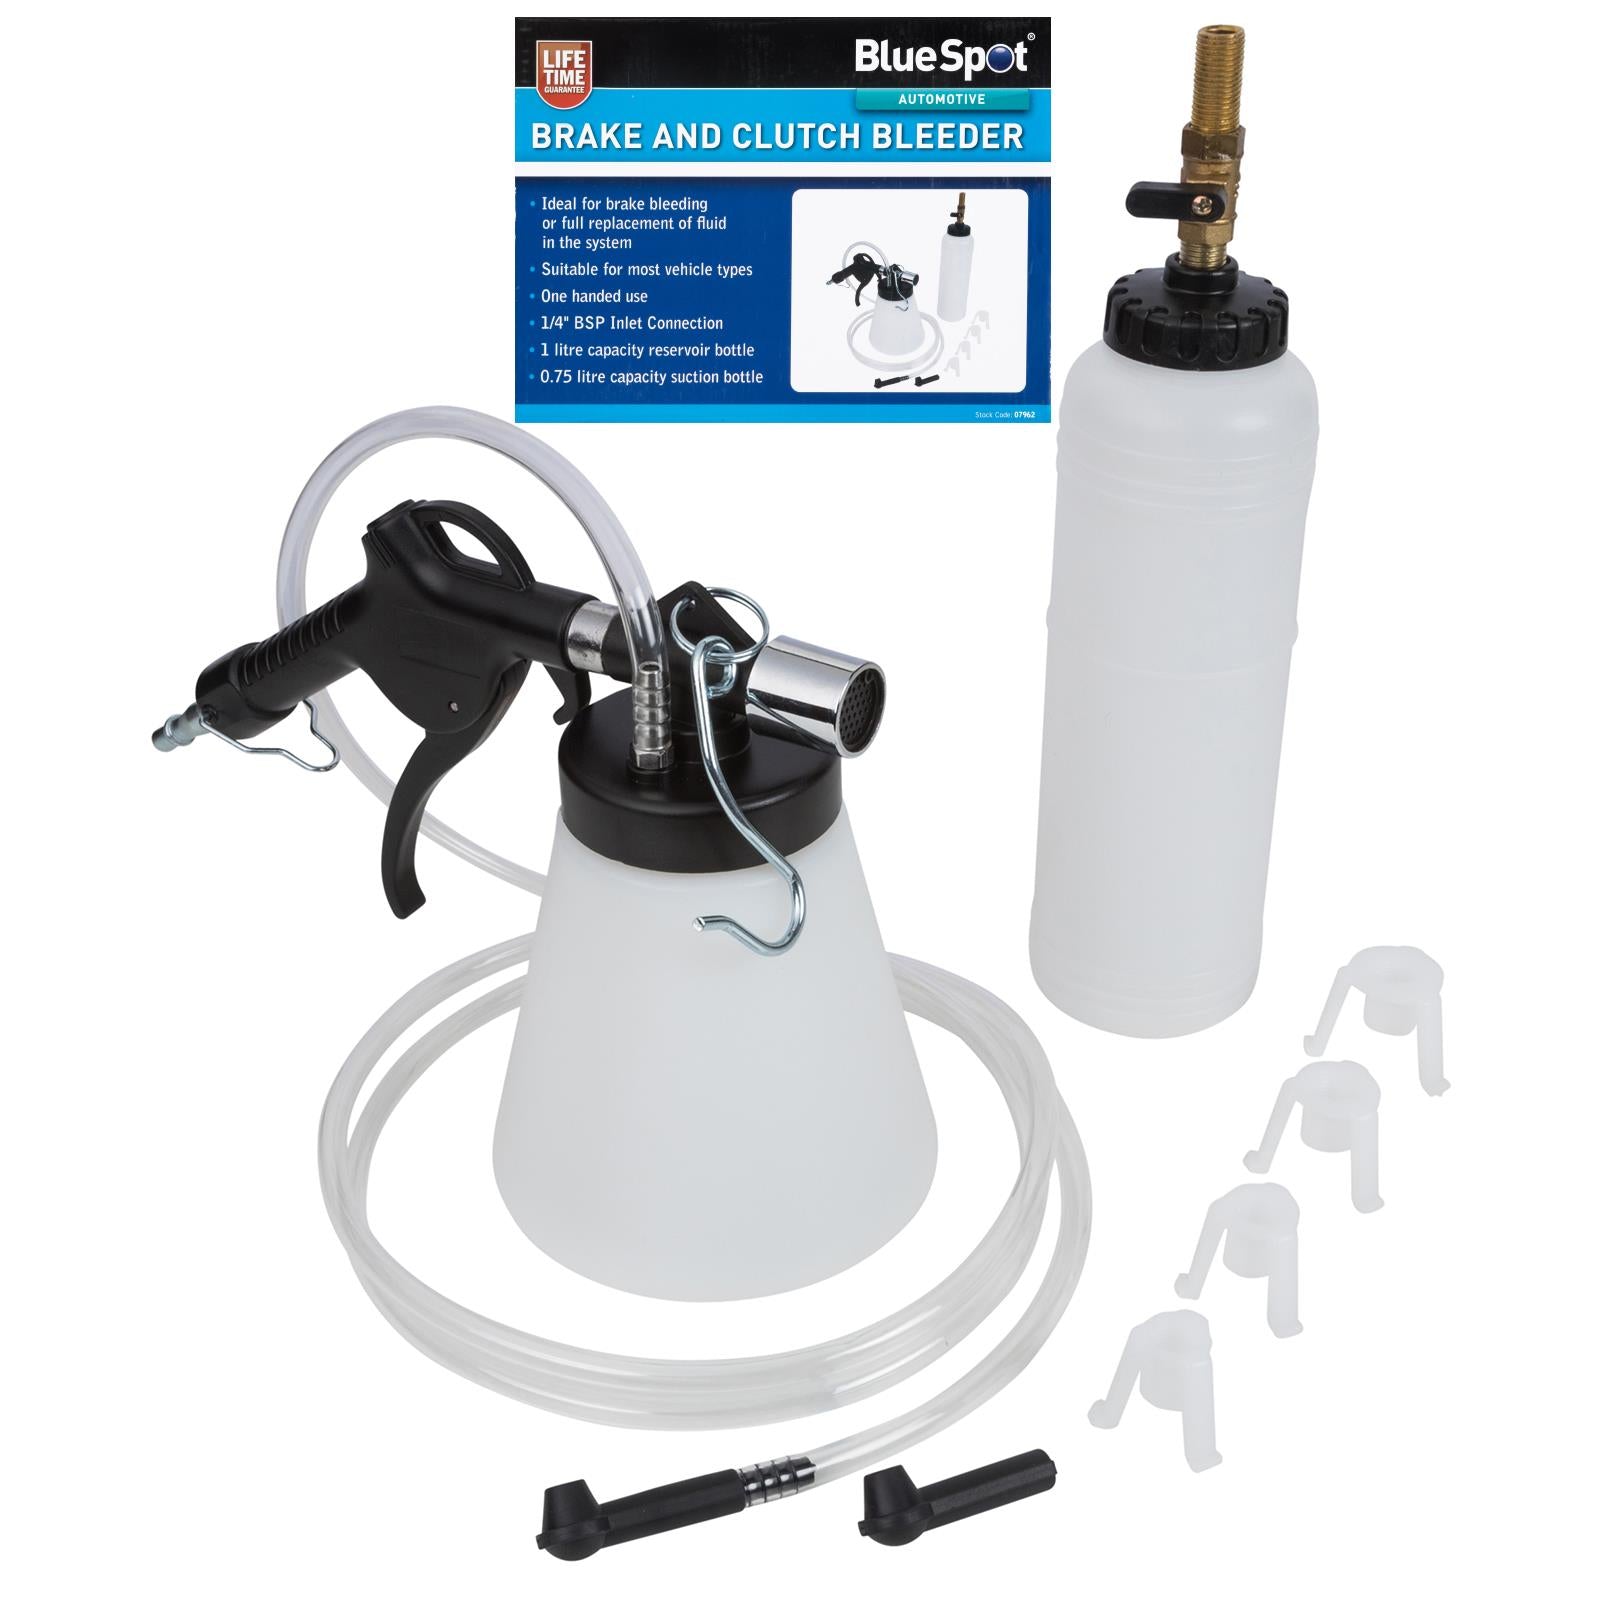 BlueSpot Brake and Clutch Bleeder 1L with 1/4" BSP Inlet One Handed Use